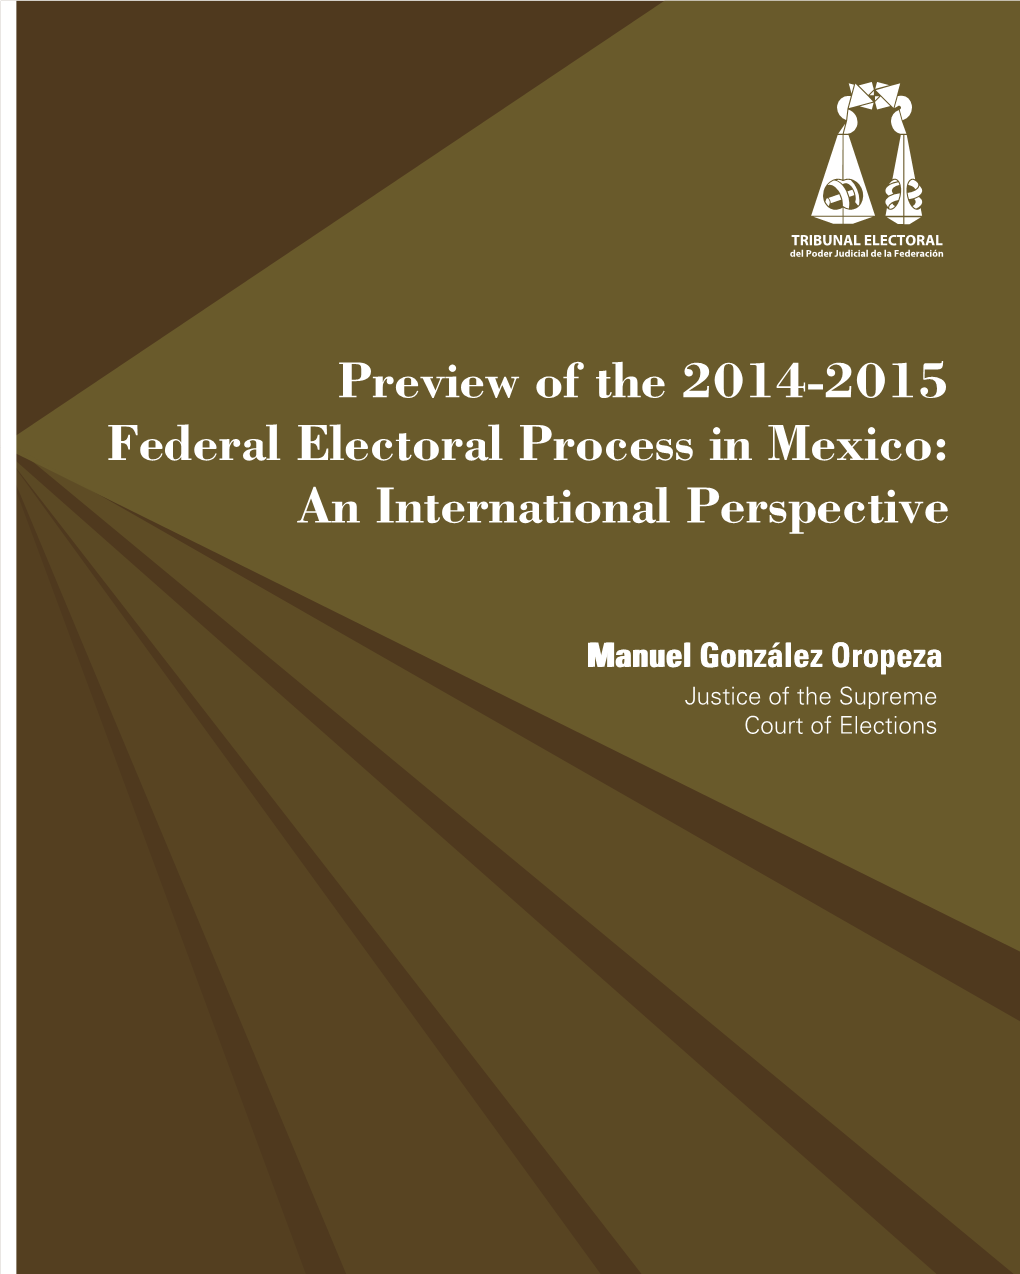 Preview of the 2014-2015 Federal Electoral Process in Mexico: an International Perspective